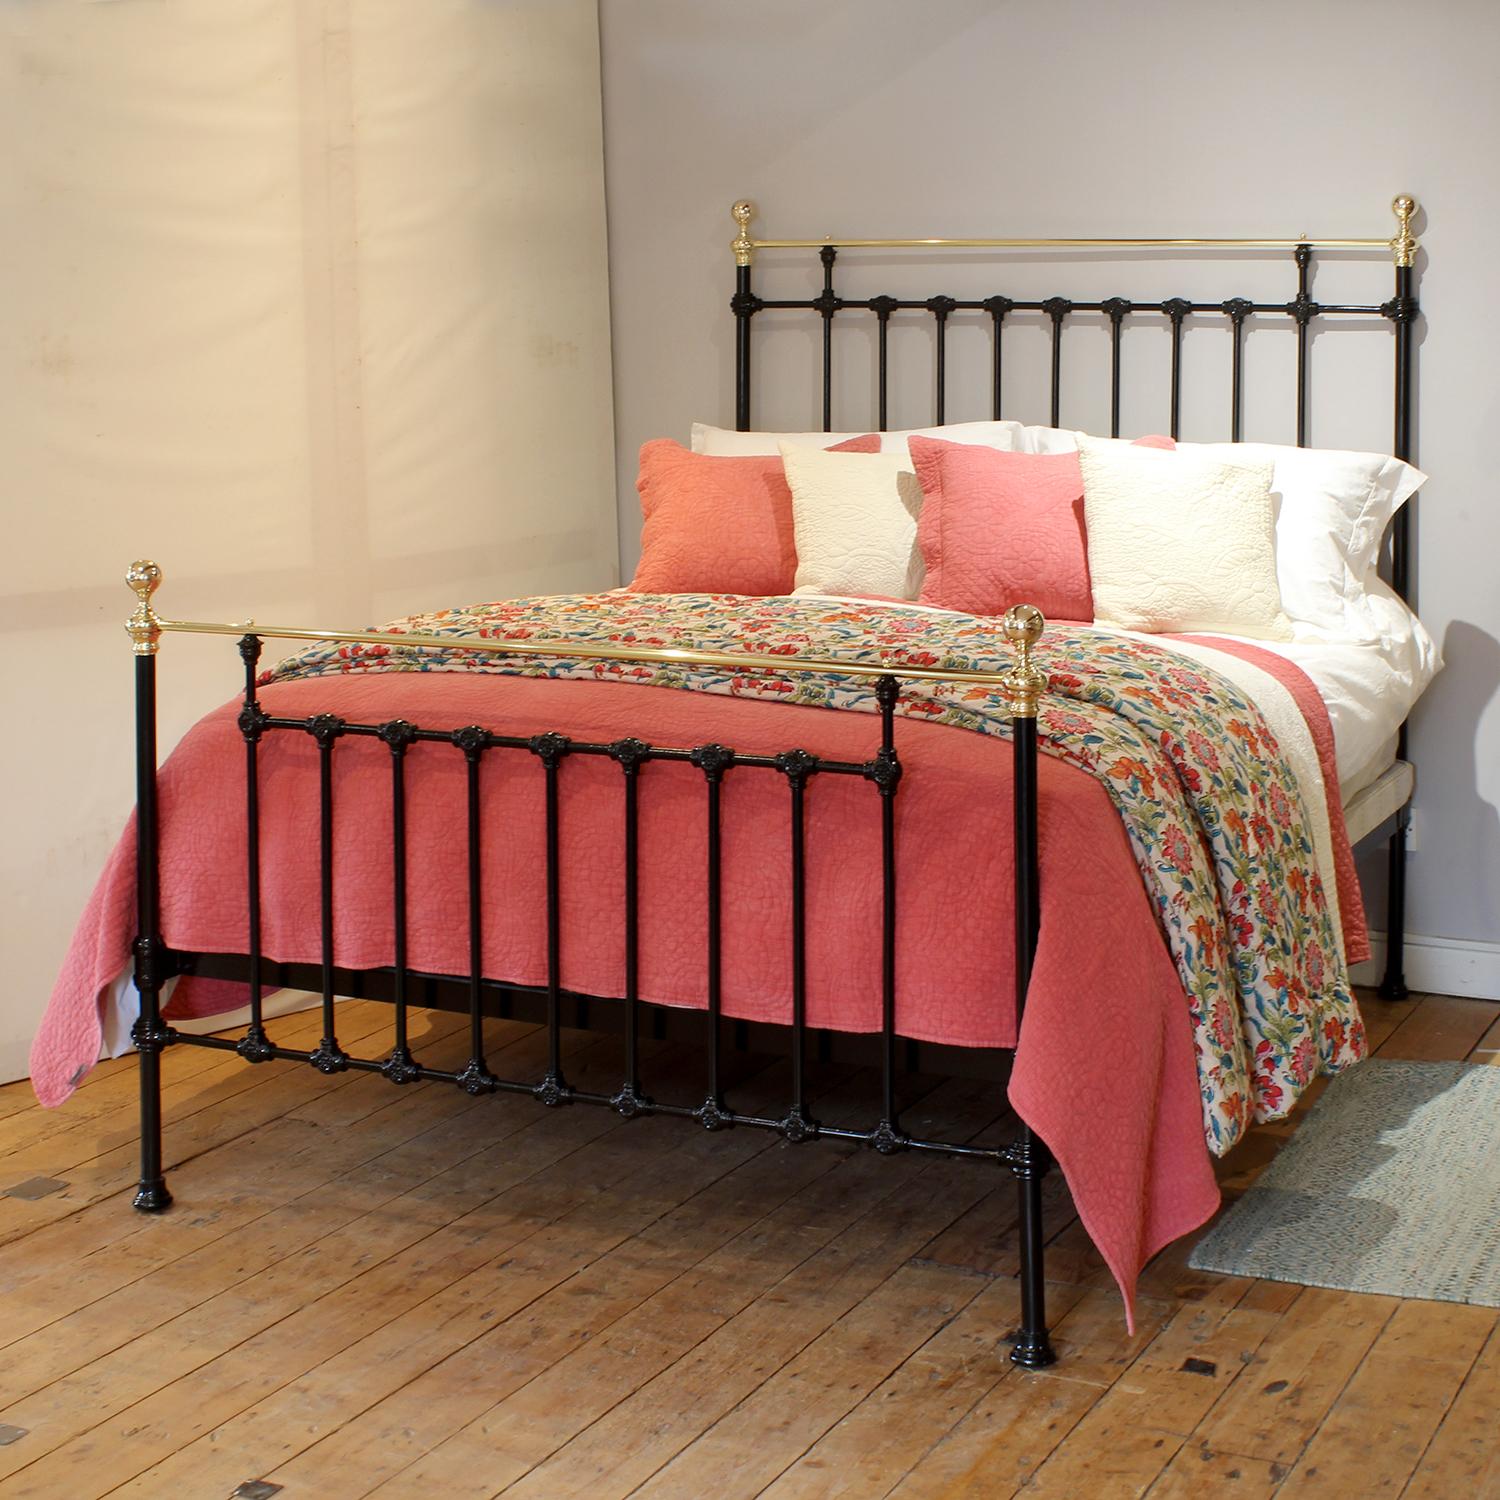 An attractive cast iron antique bed finished in black with straight brass top rails and decorative castings.

This bed accepts a UK king size or US queen size (5ft, 60in or 150cm wide) base and mattress set.

The price includes a standard firm bed